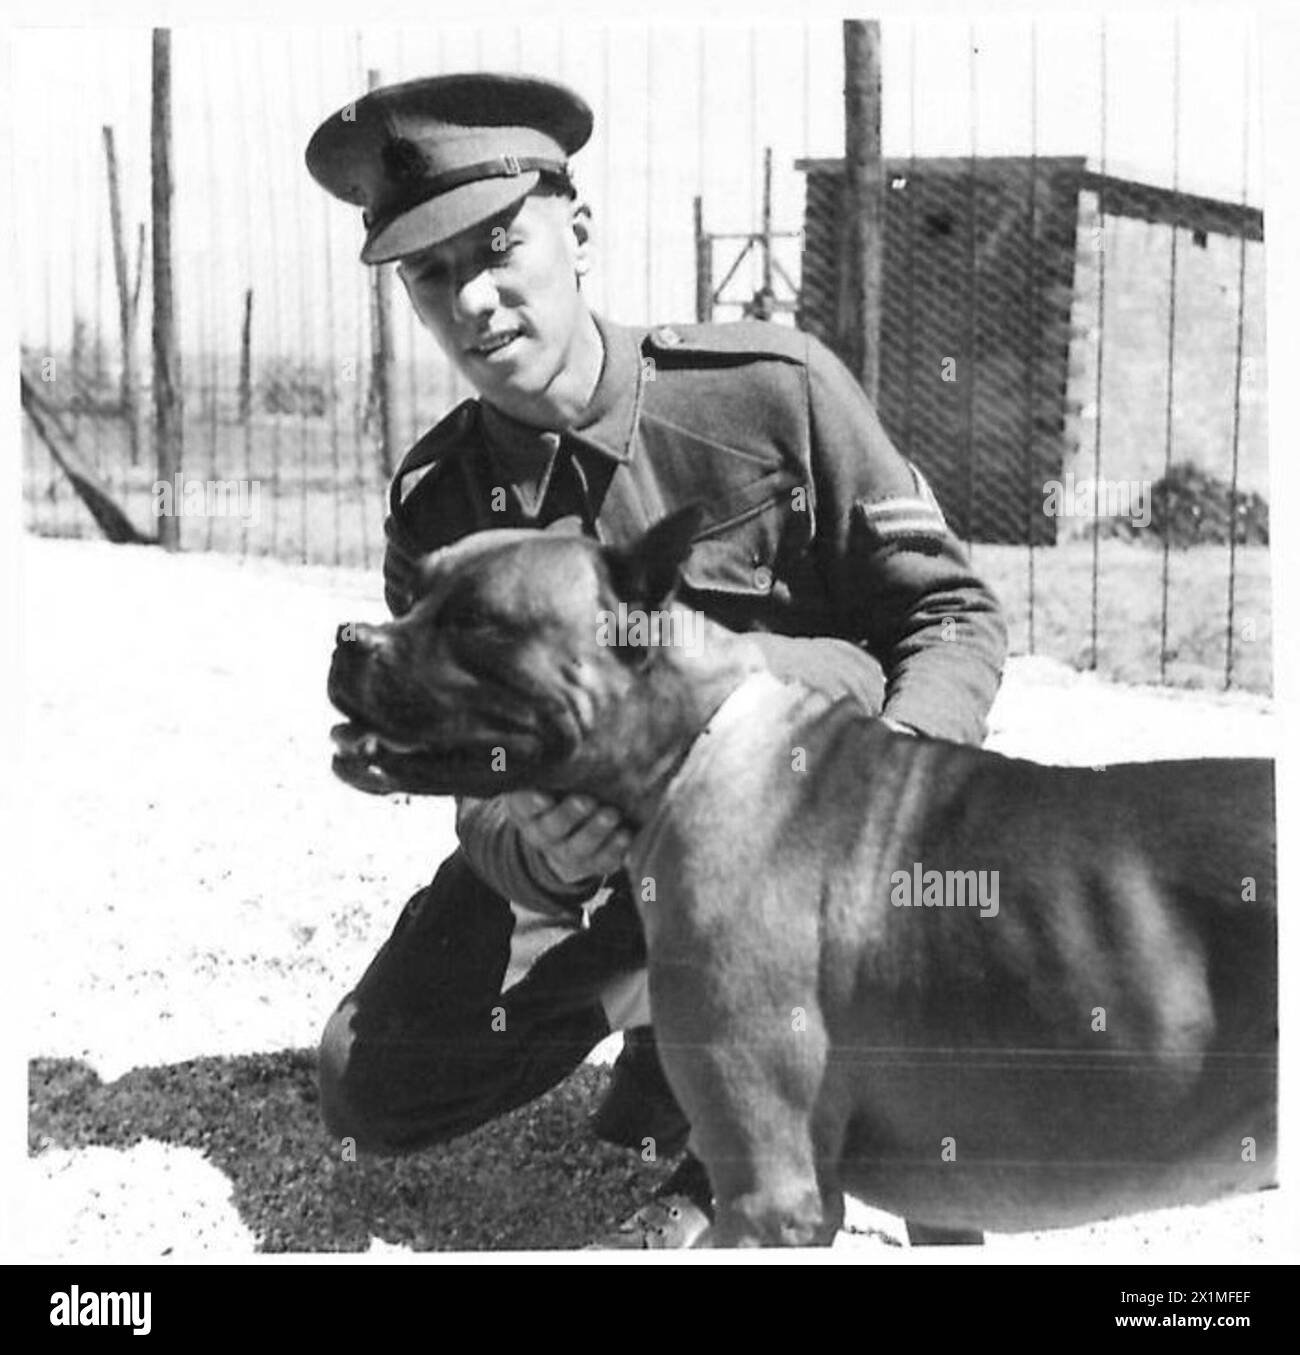 THESE PHOTOGRAPHS ARE TO ILLUSTRATE OBSERVER STORIES BY CAPT. SHEARER - Cpl. R. Gray of Towngate, Market Deeping, Peterborough, stroking his police dog 'Bruce'. Observer Story No. 79, British Army Stock Photo